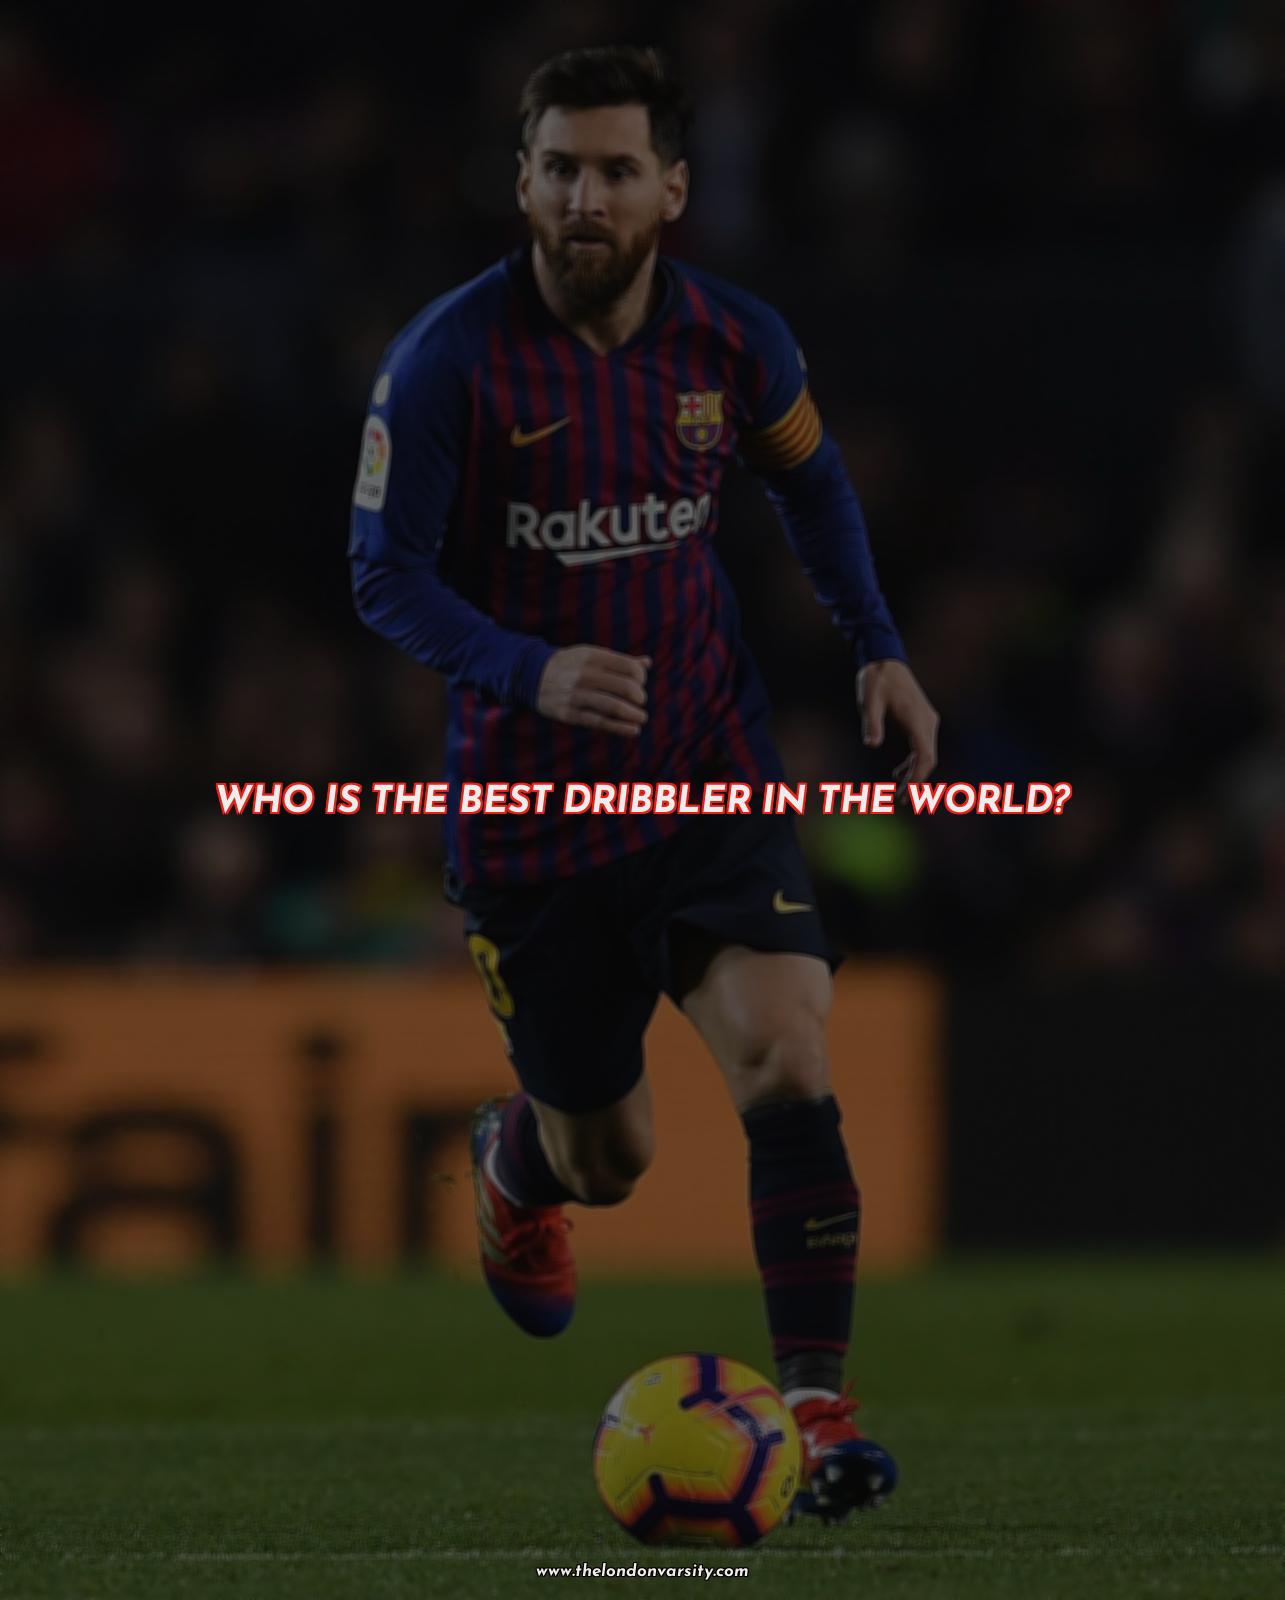 Who is the best dribbler in the world?